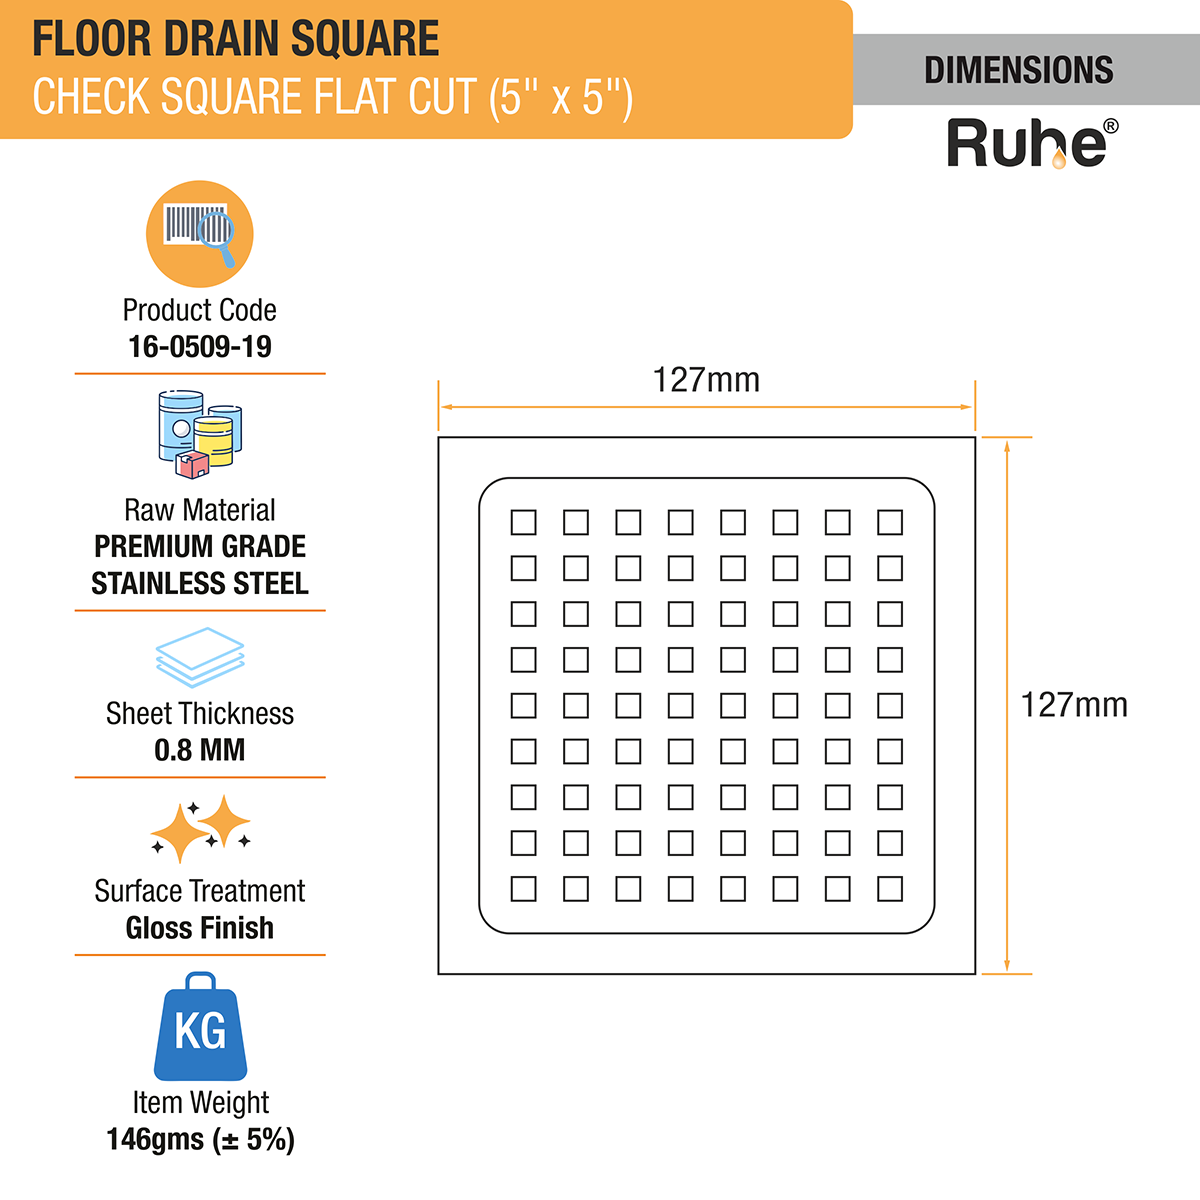 Check Floor Drain Square Flat Cut (5 x 5 Inches) dimensions and size